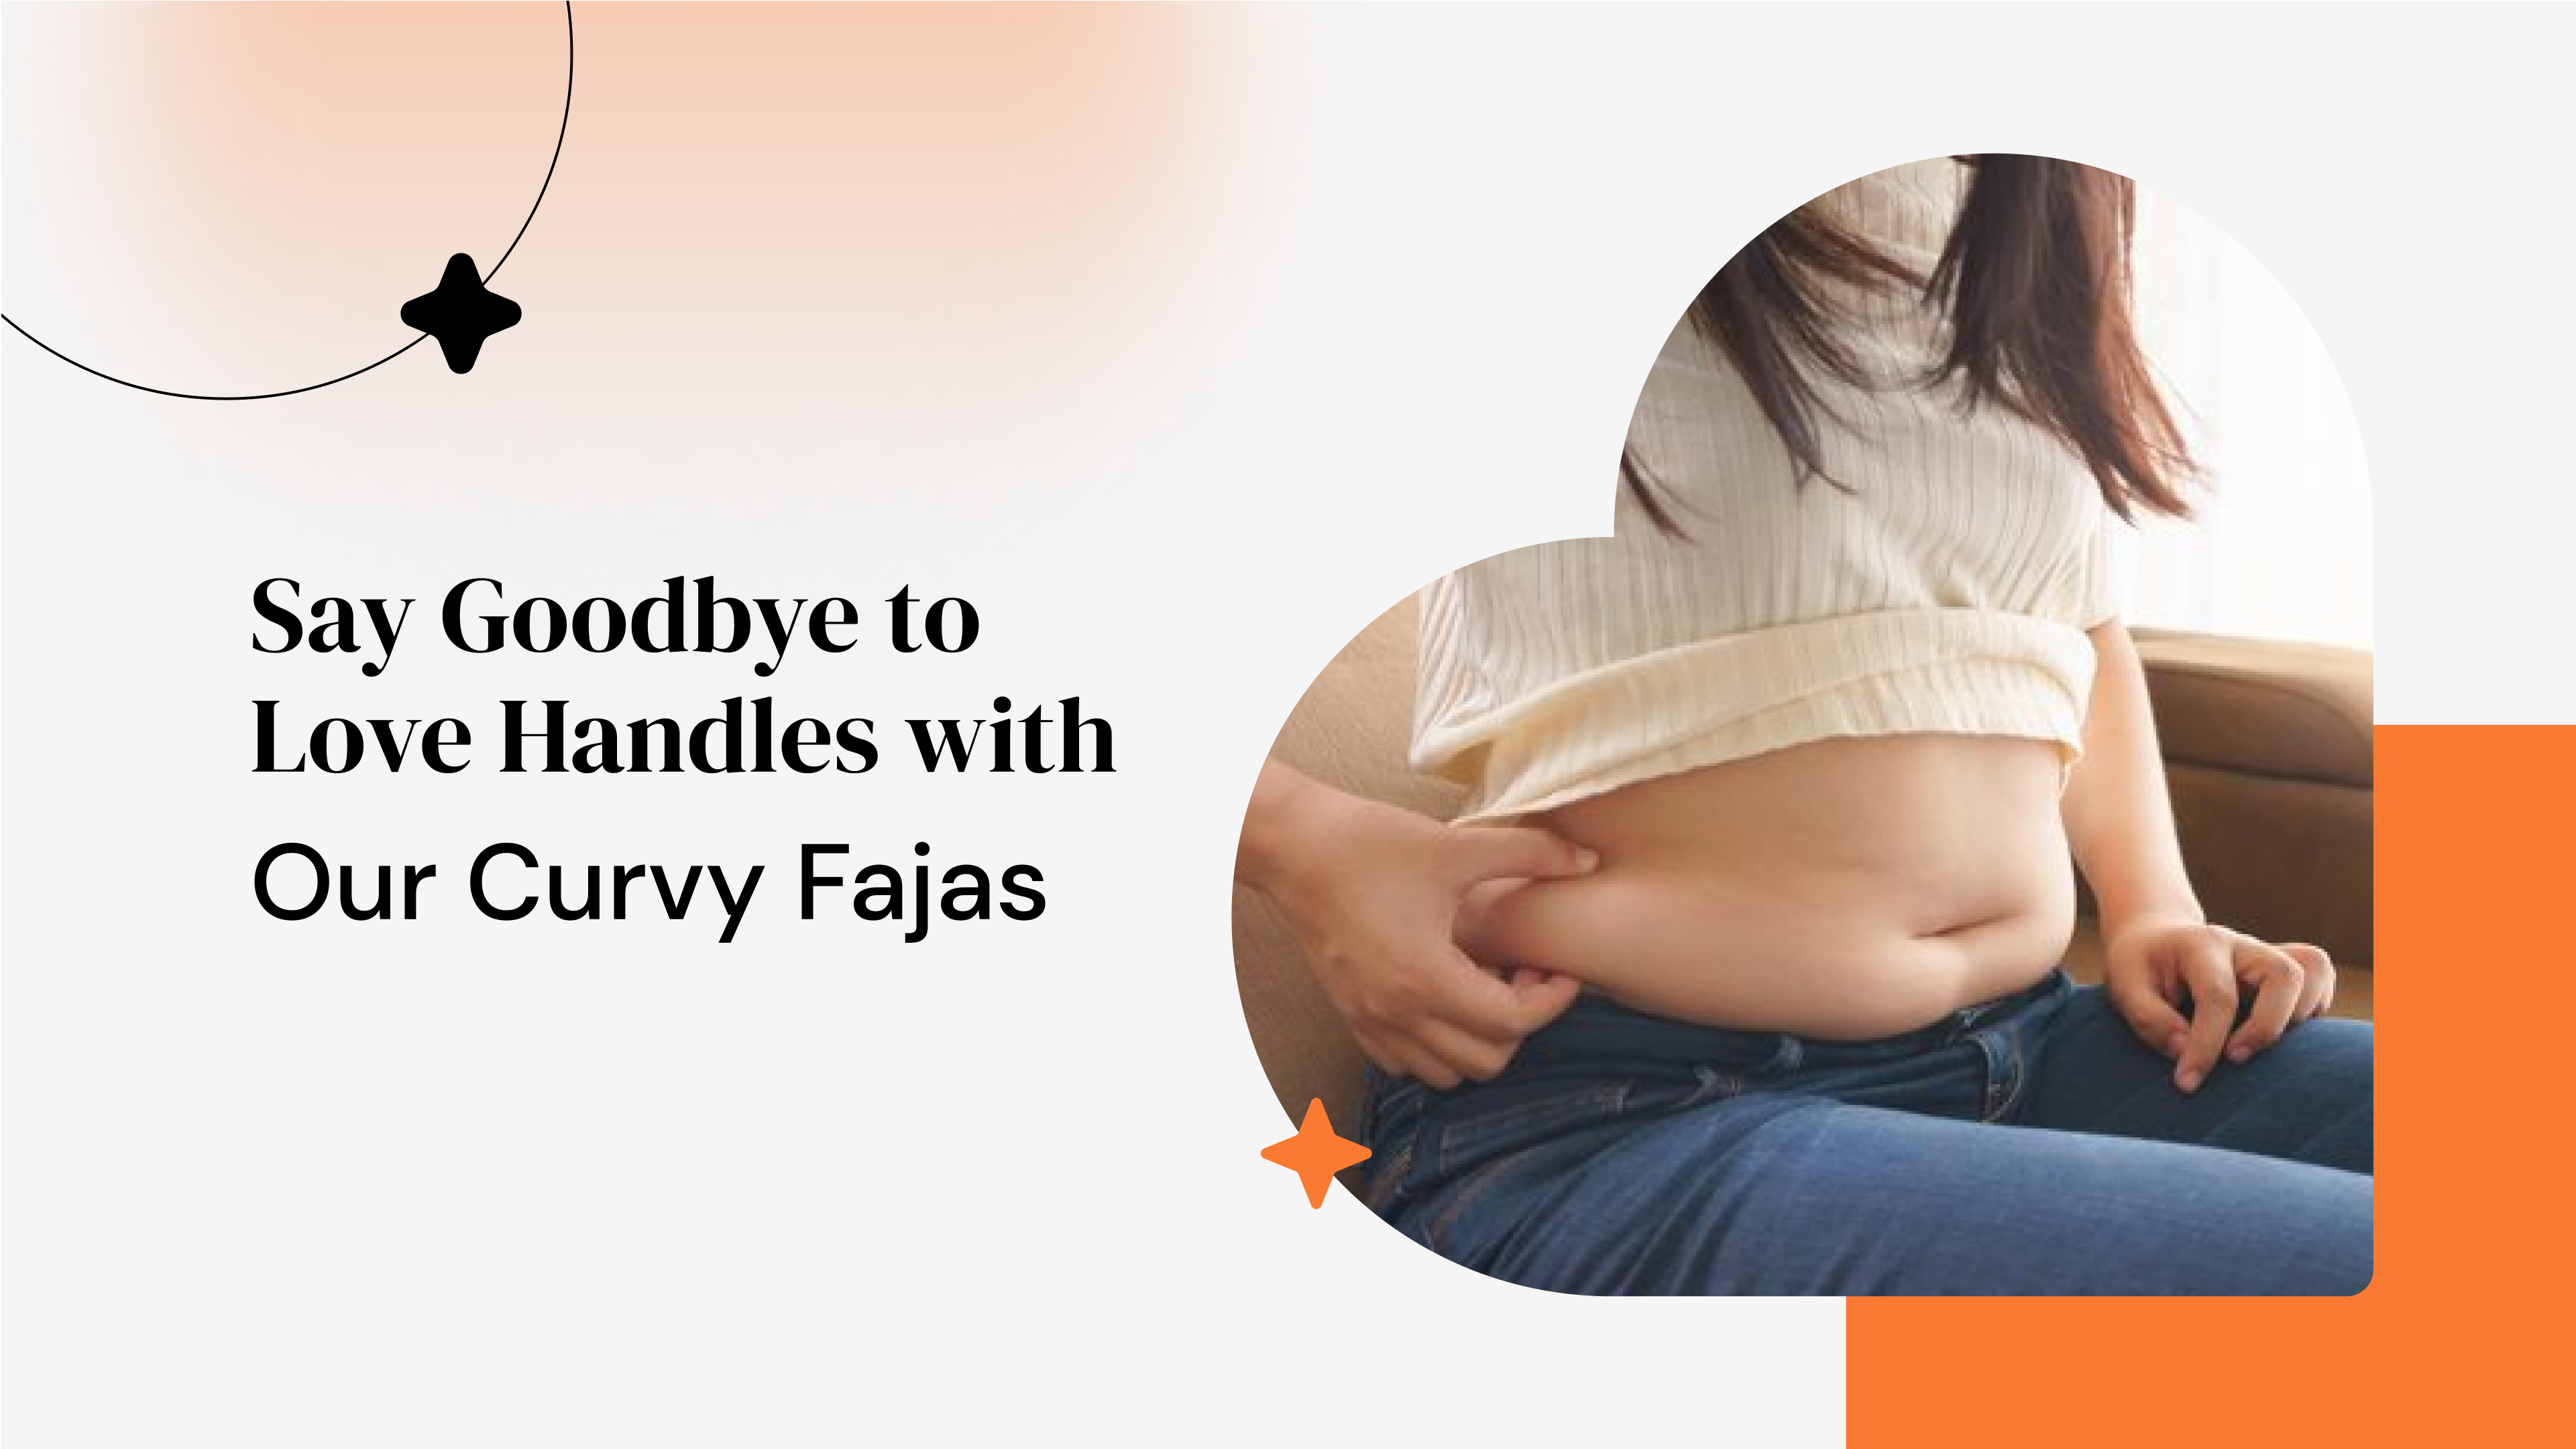 Say Goodbye to Love Handles with Our Curvy Fajas